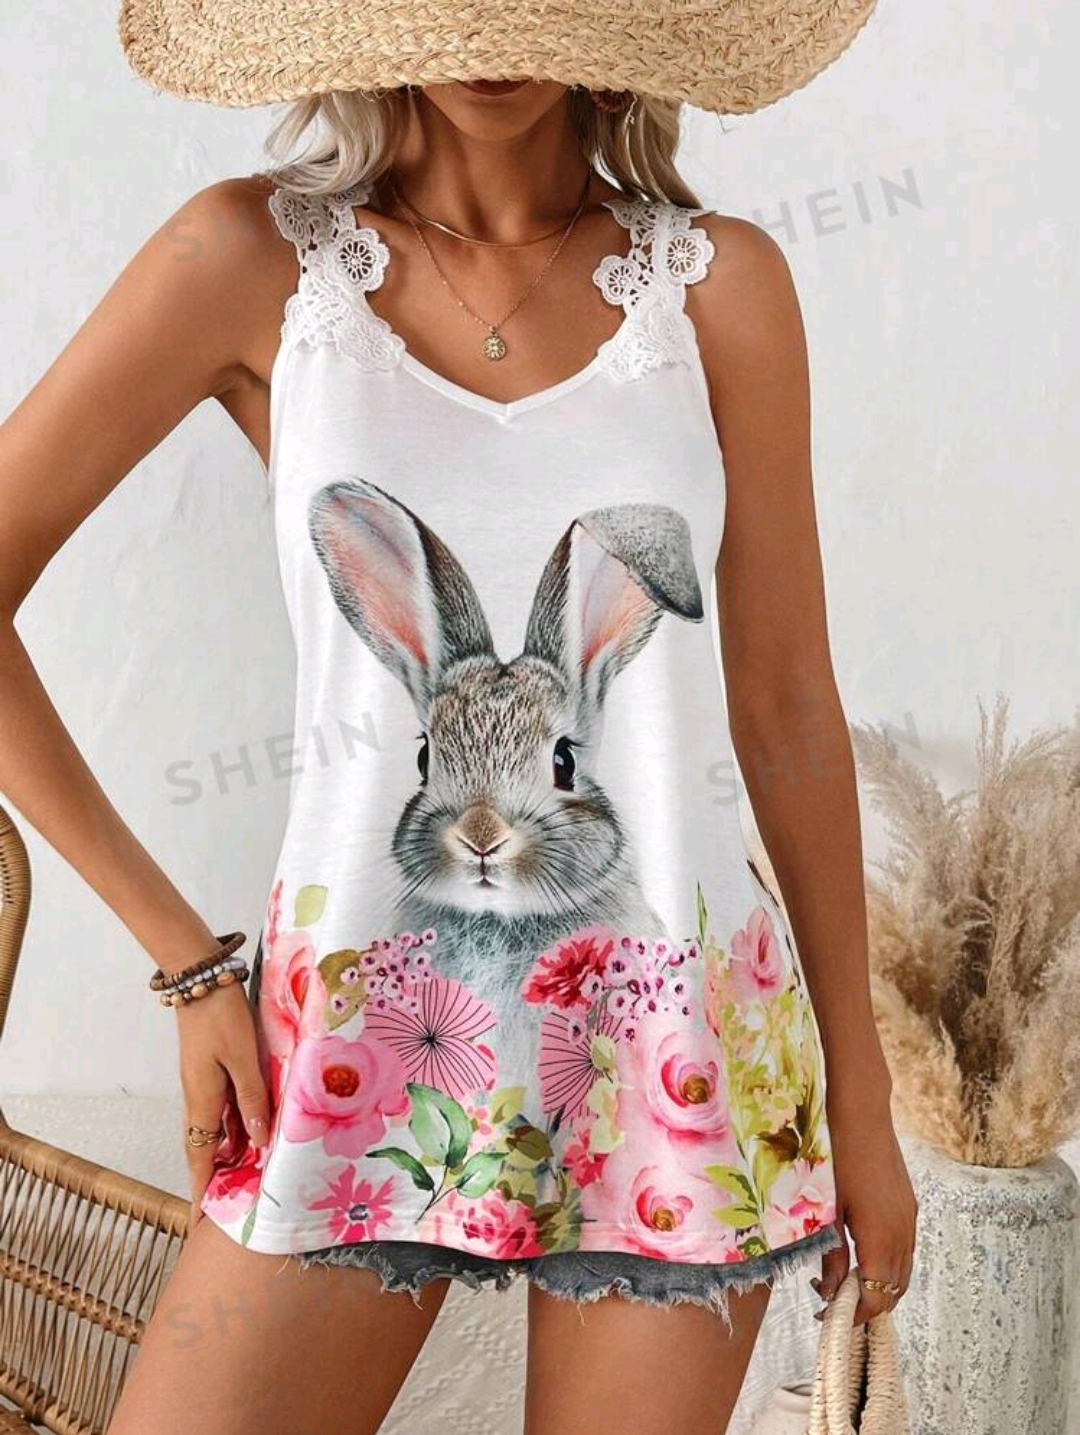 SHEIN LUNE Summer Sleeveless Lace Trimmed Easter Rabbit & Flower Print Camisole Top